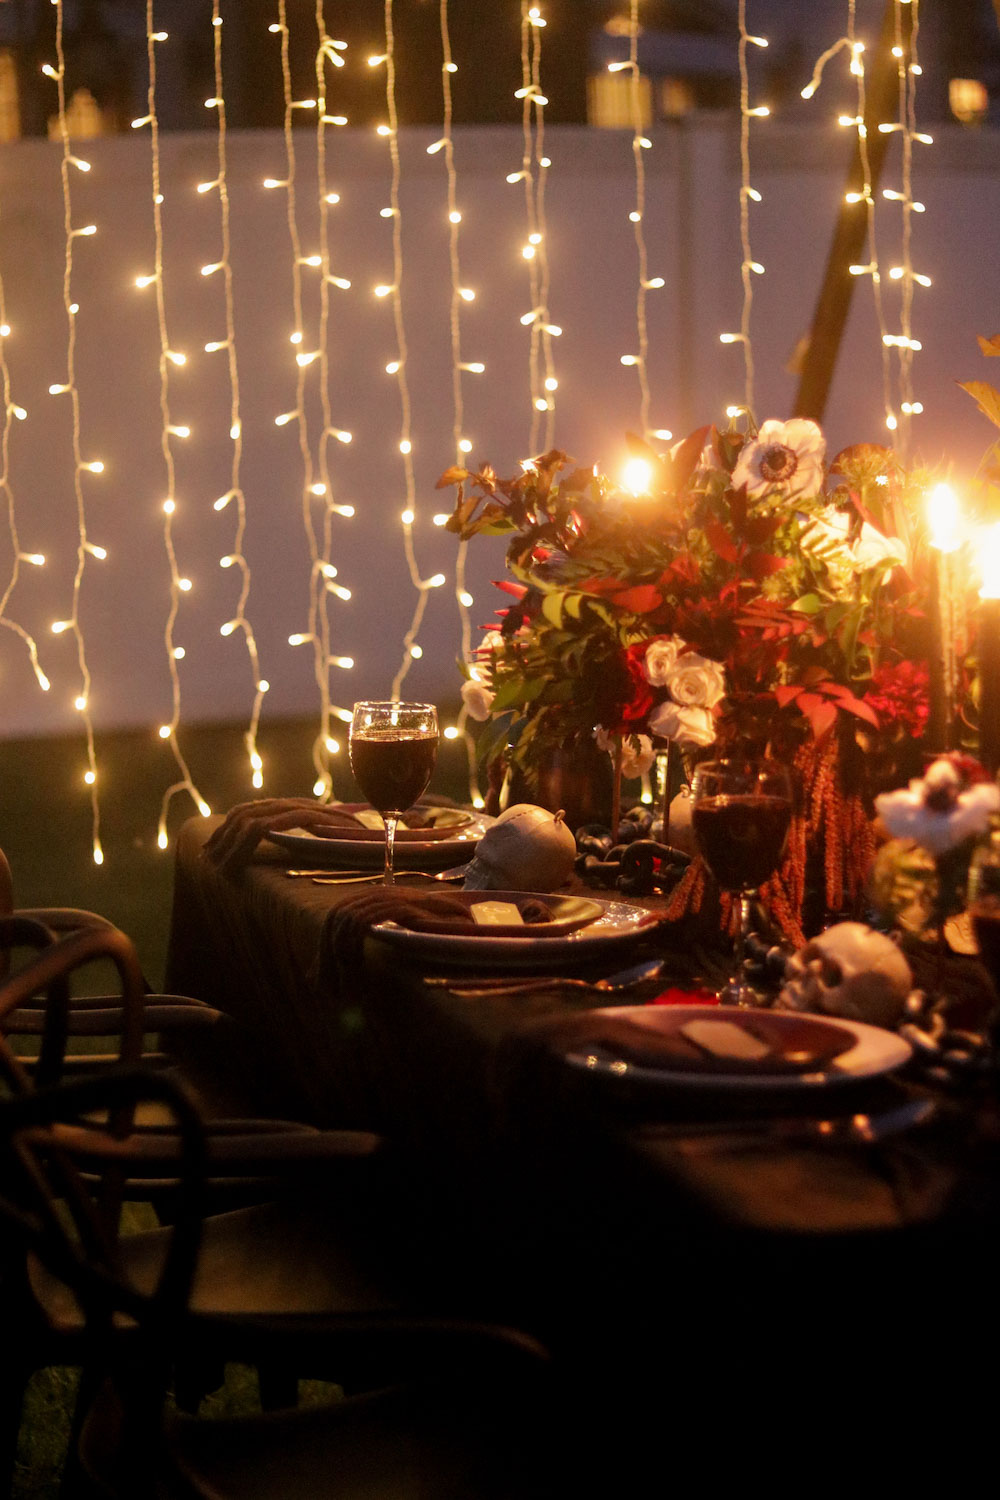 A Halloween tablescape at night lit by candles and curtain lights.